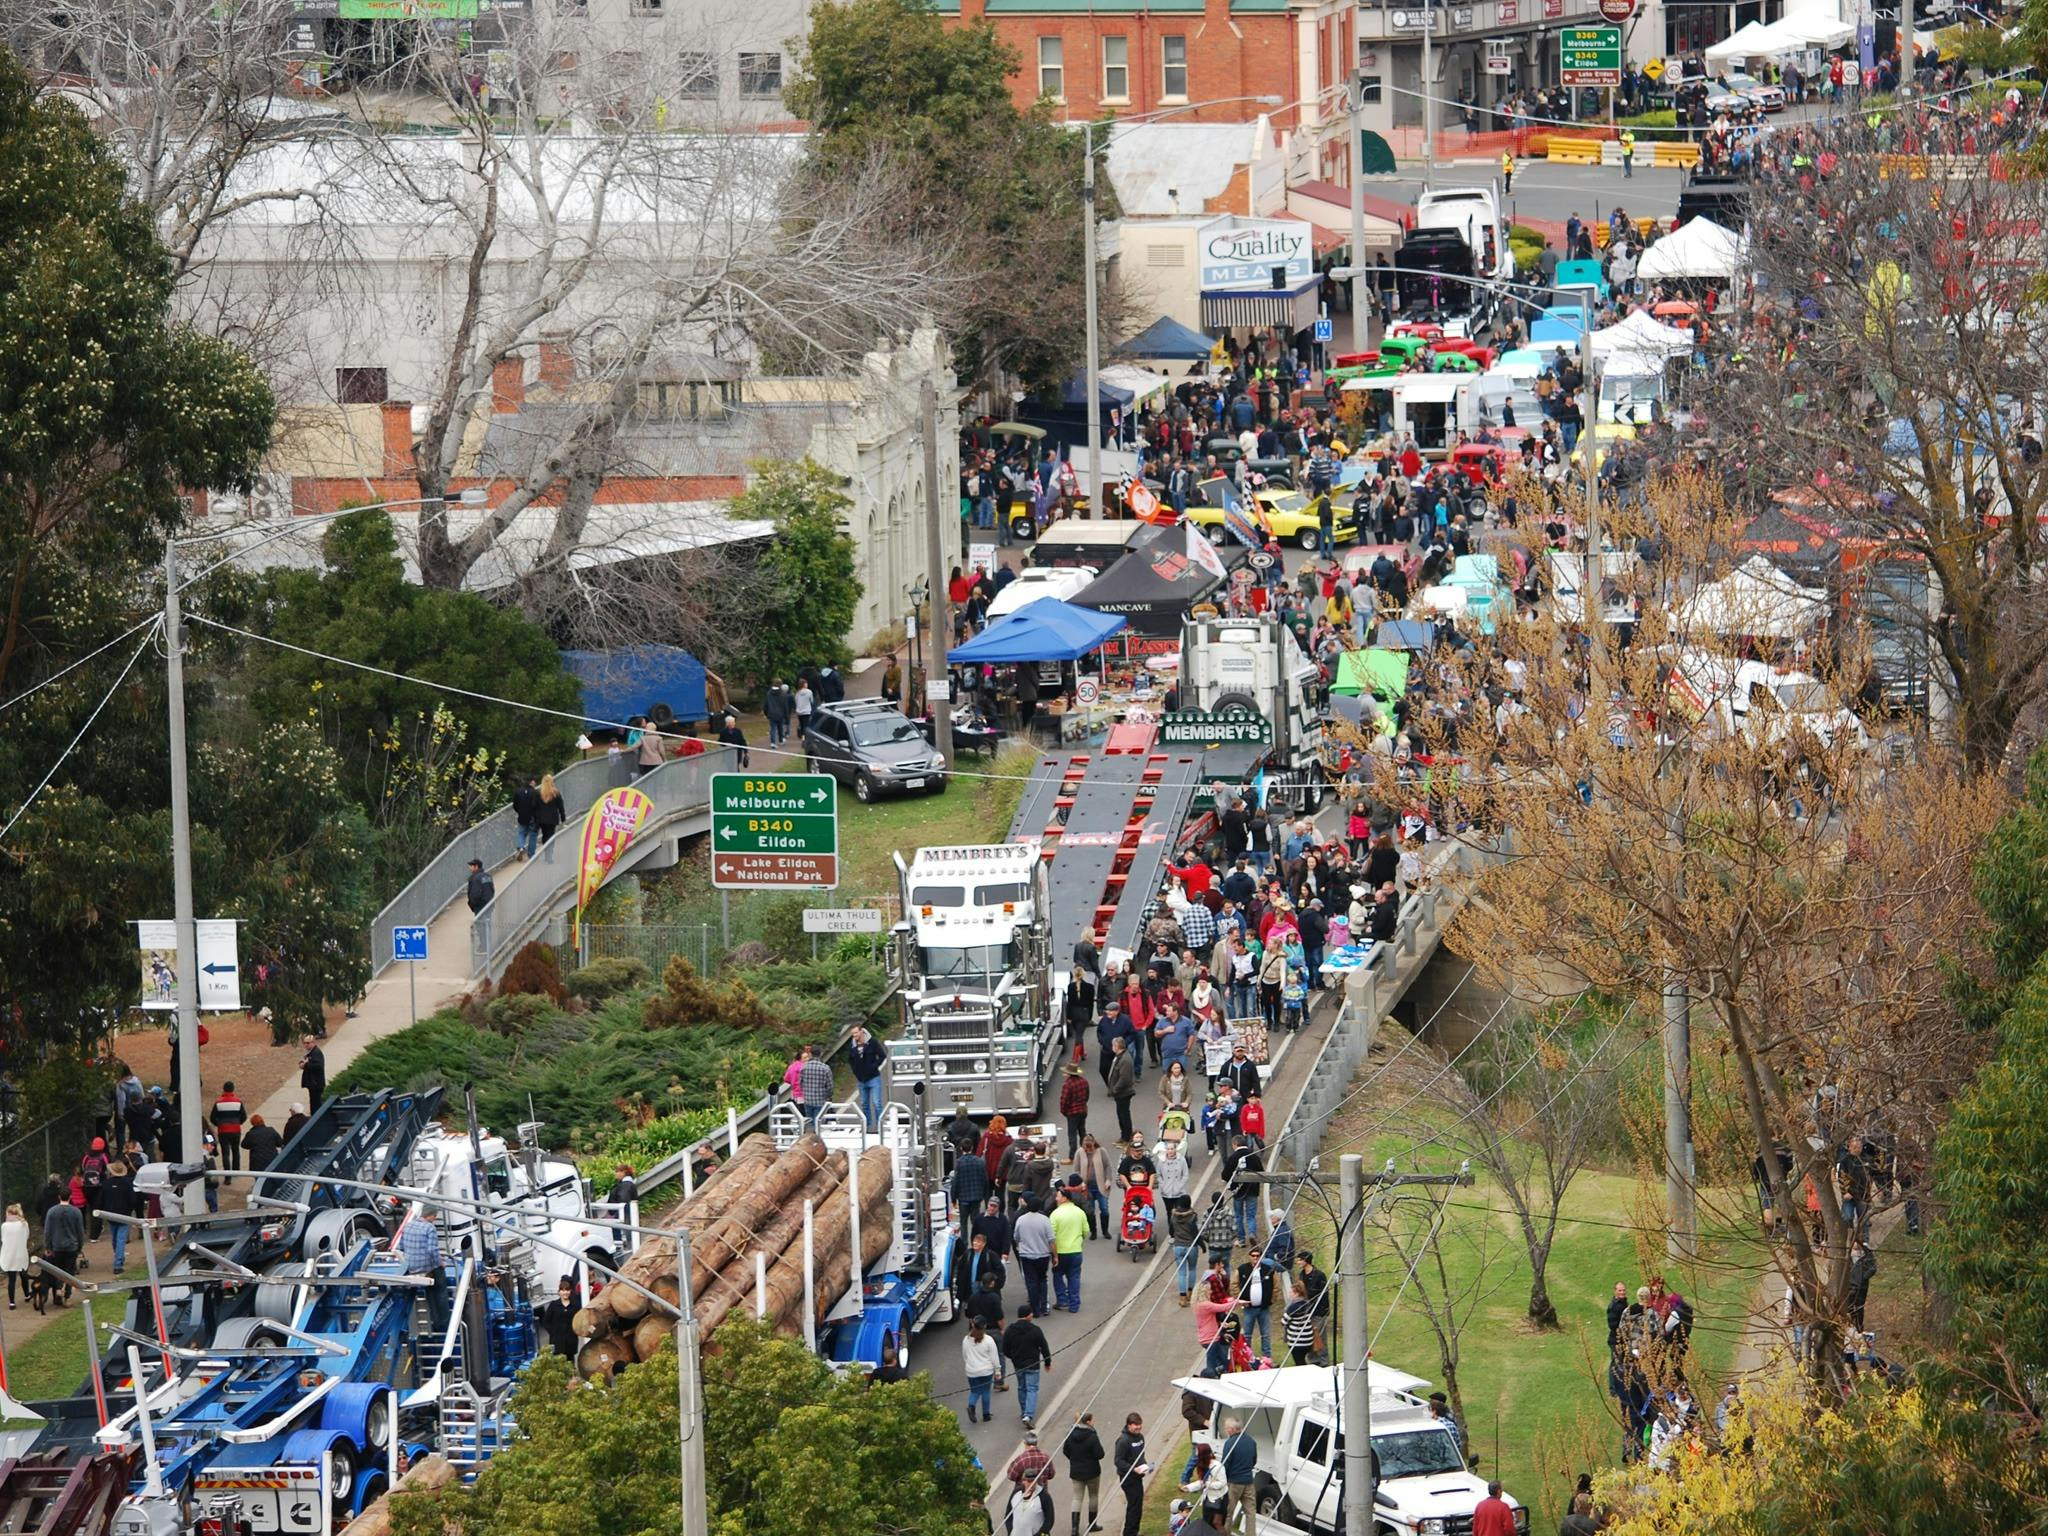 Aerial photo of logging trucks and crowds in street